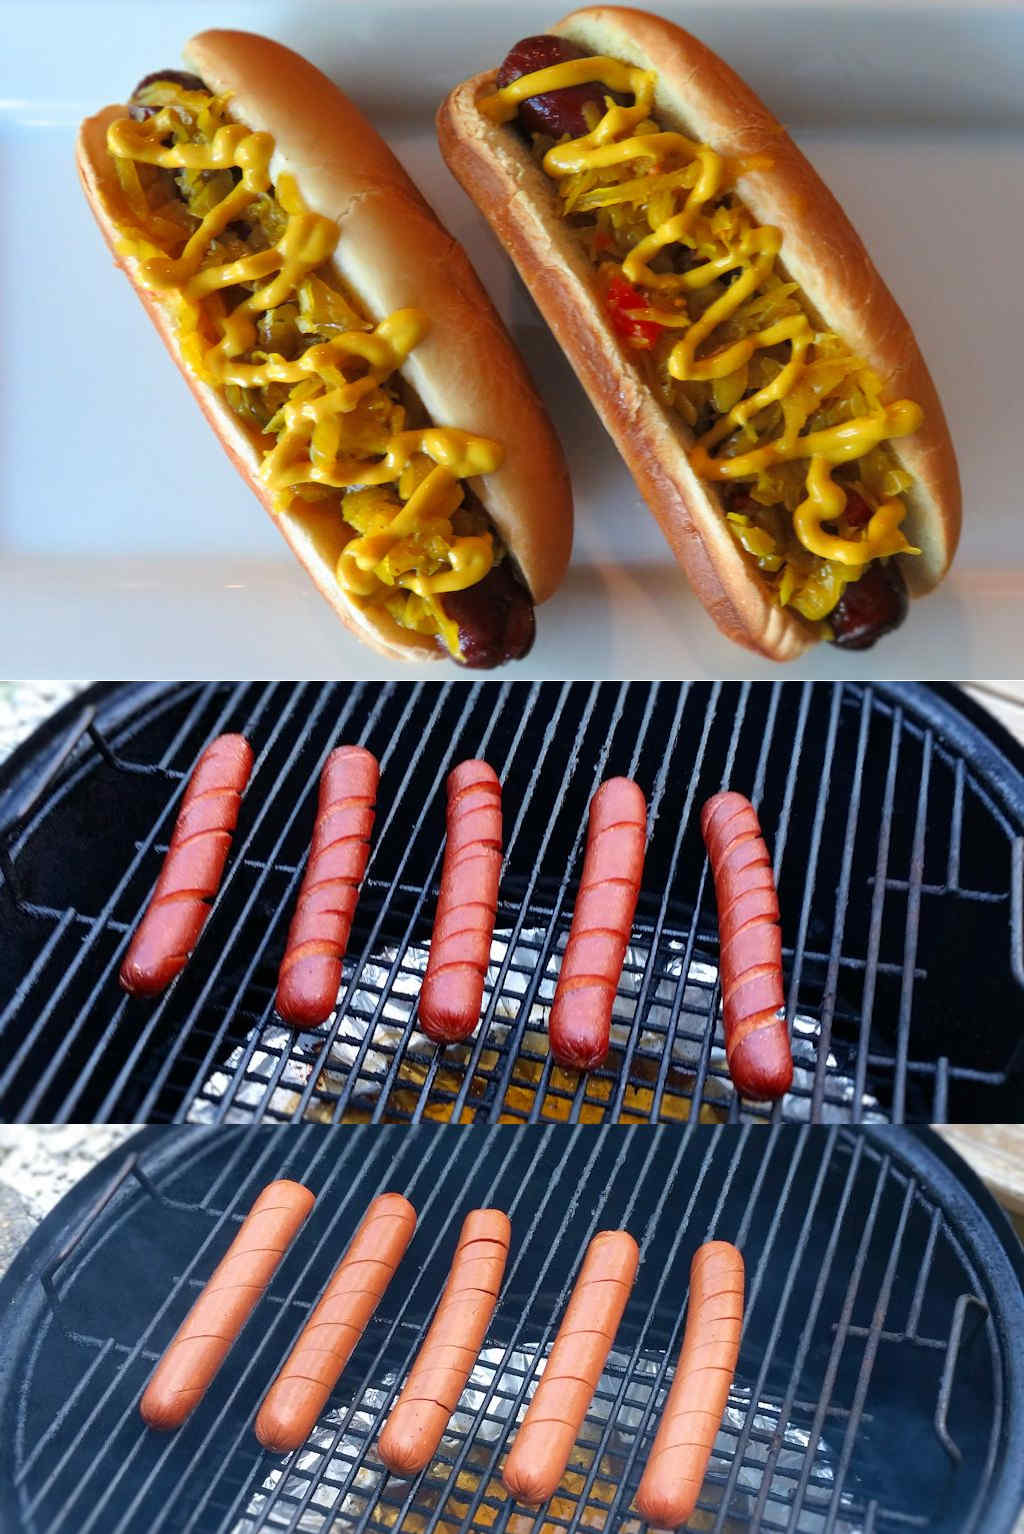 Smoked Spiral Hot Dogs Version 2.0